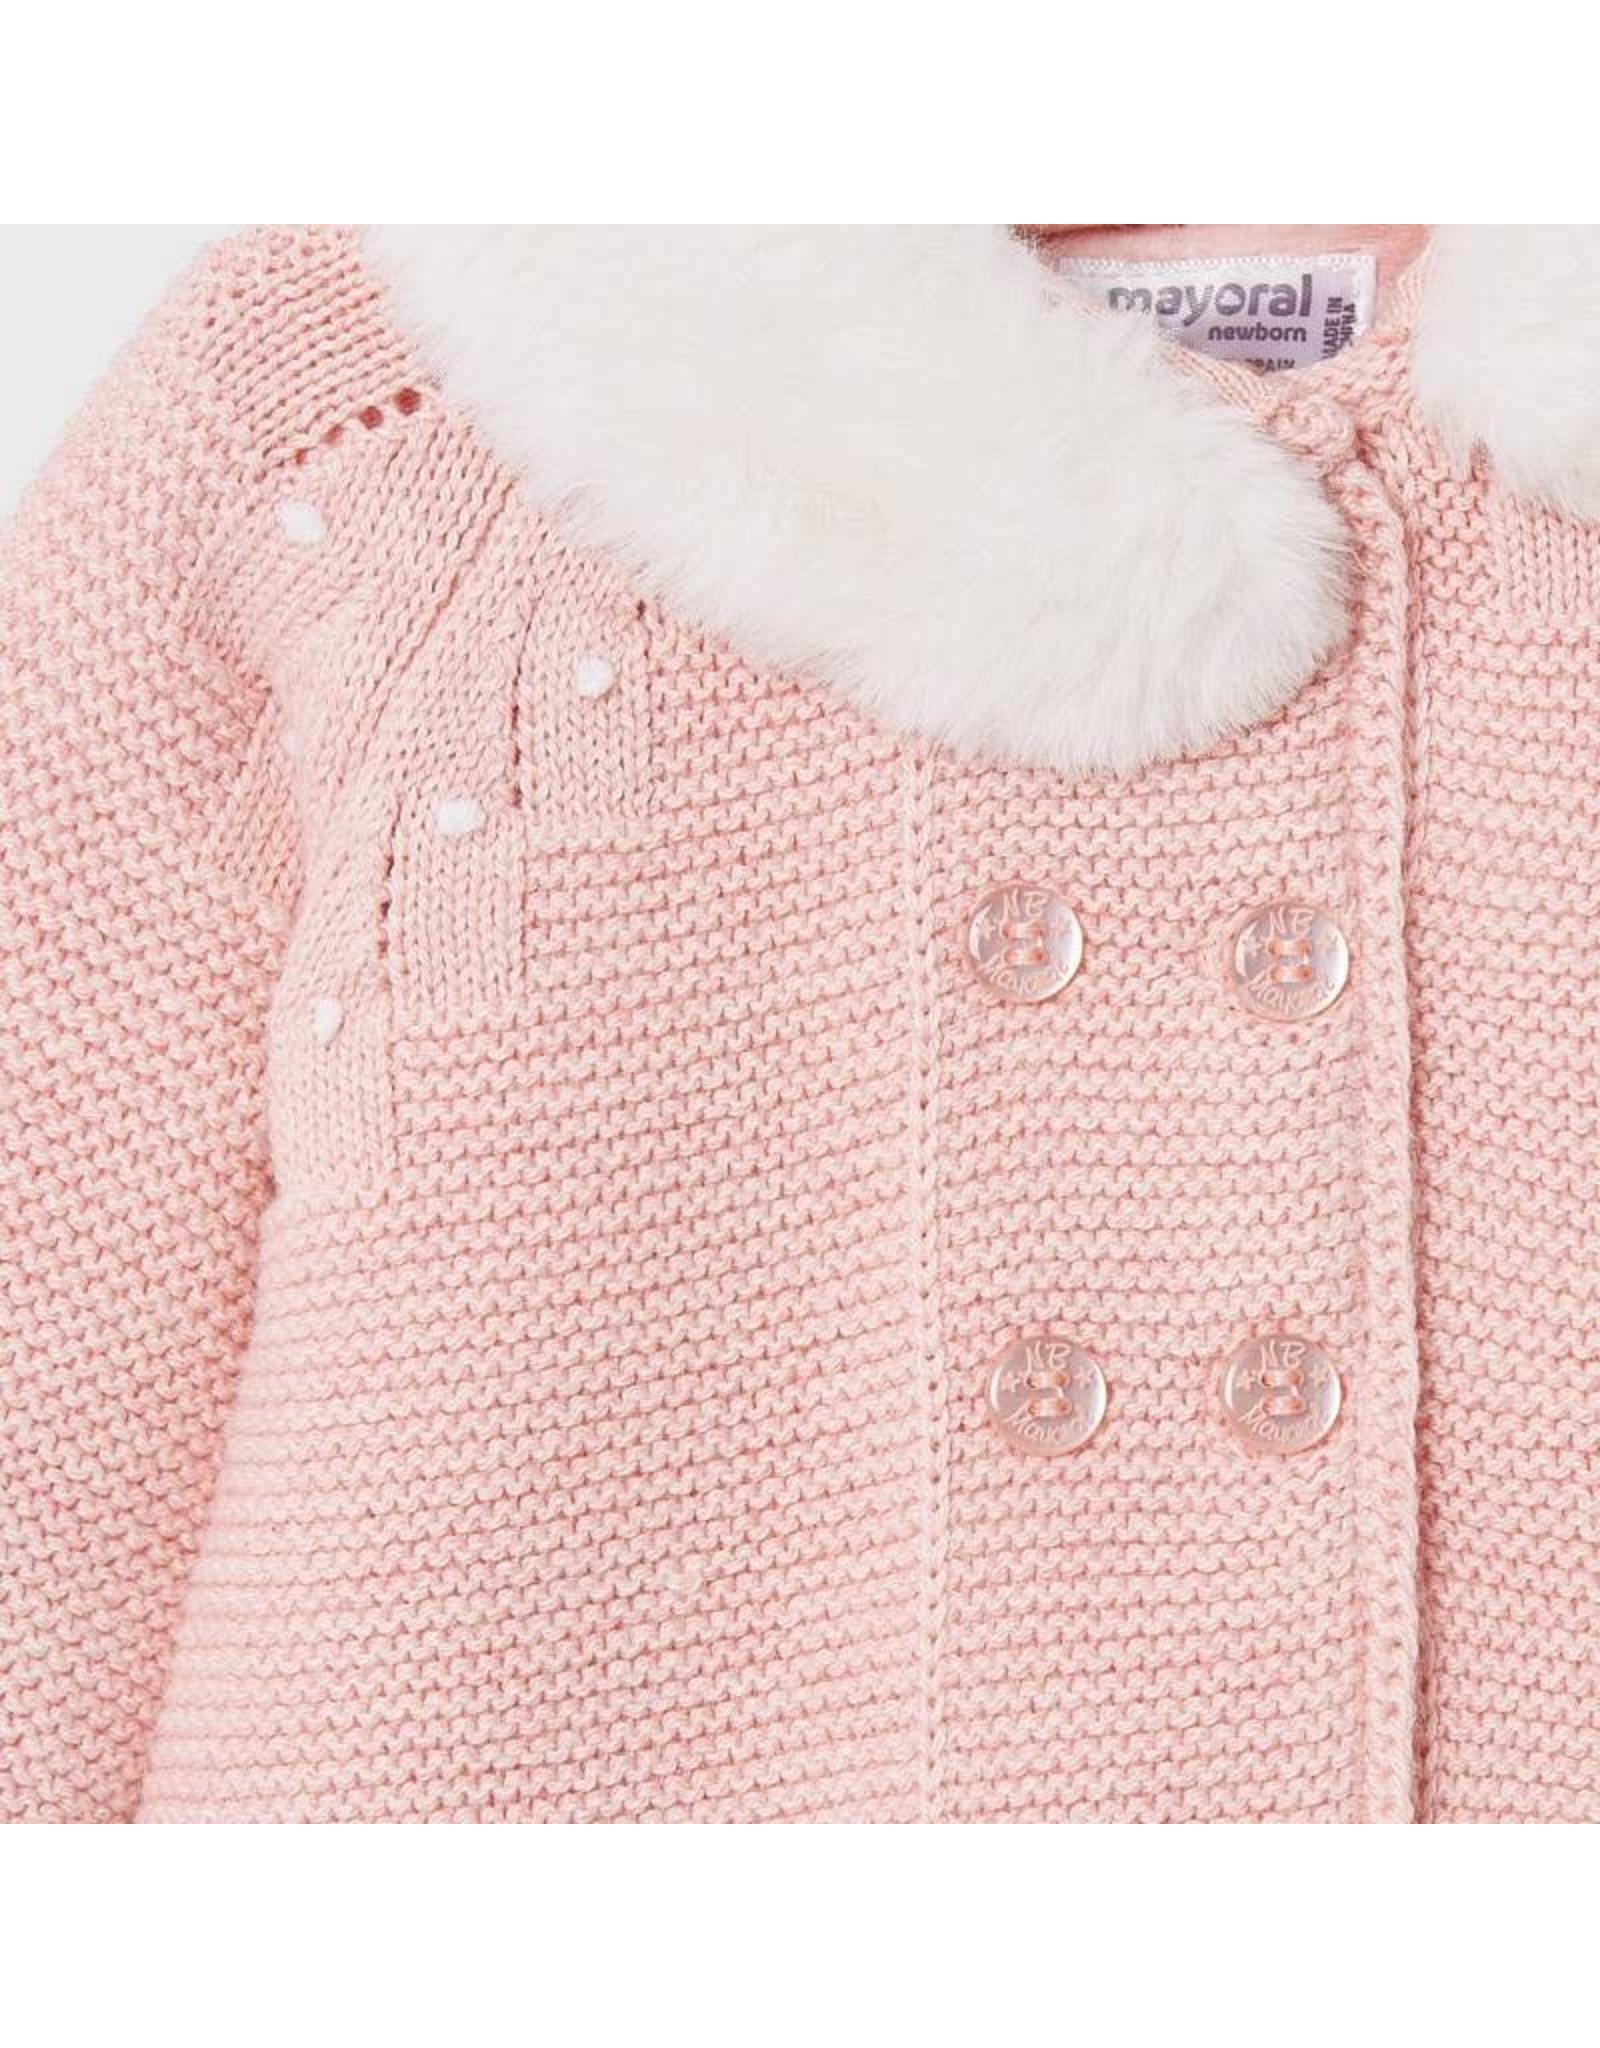 Mayoral Knit Coat and Bonnet in Blush